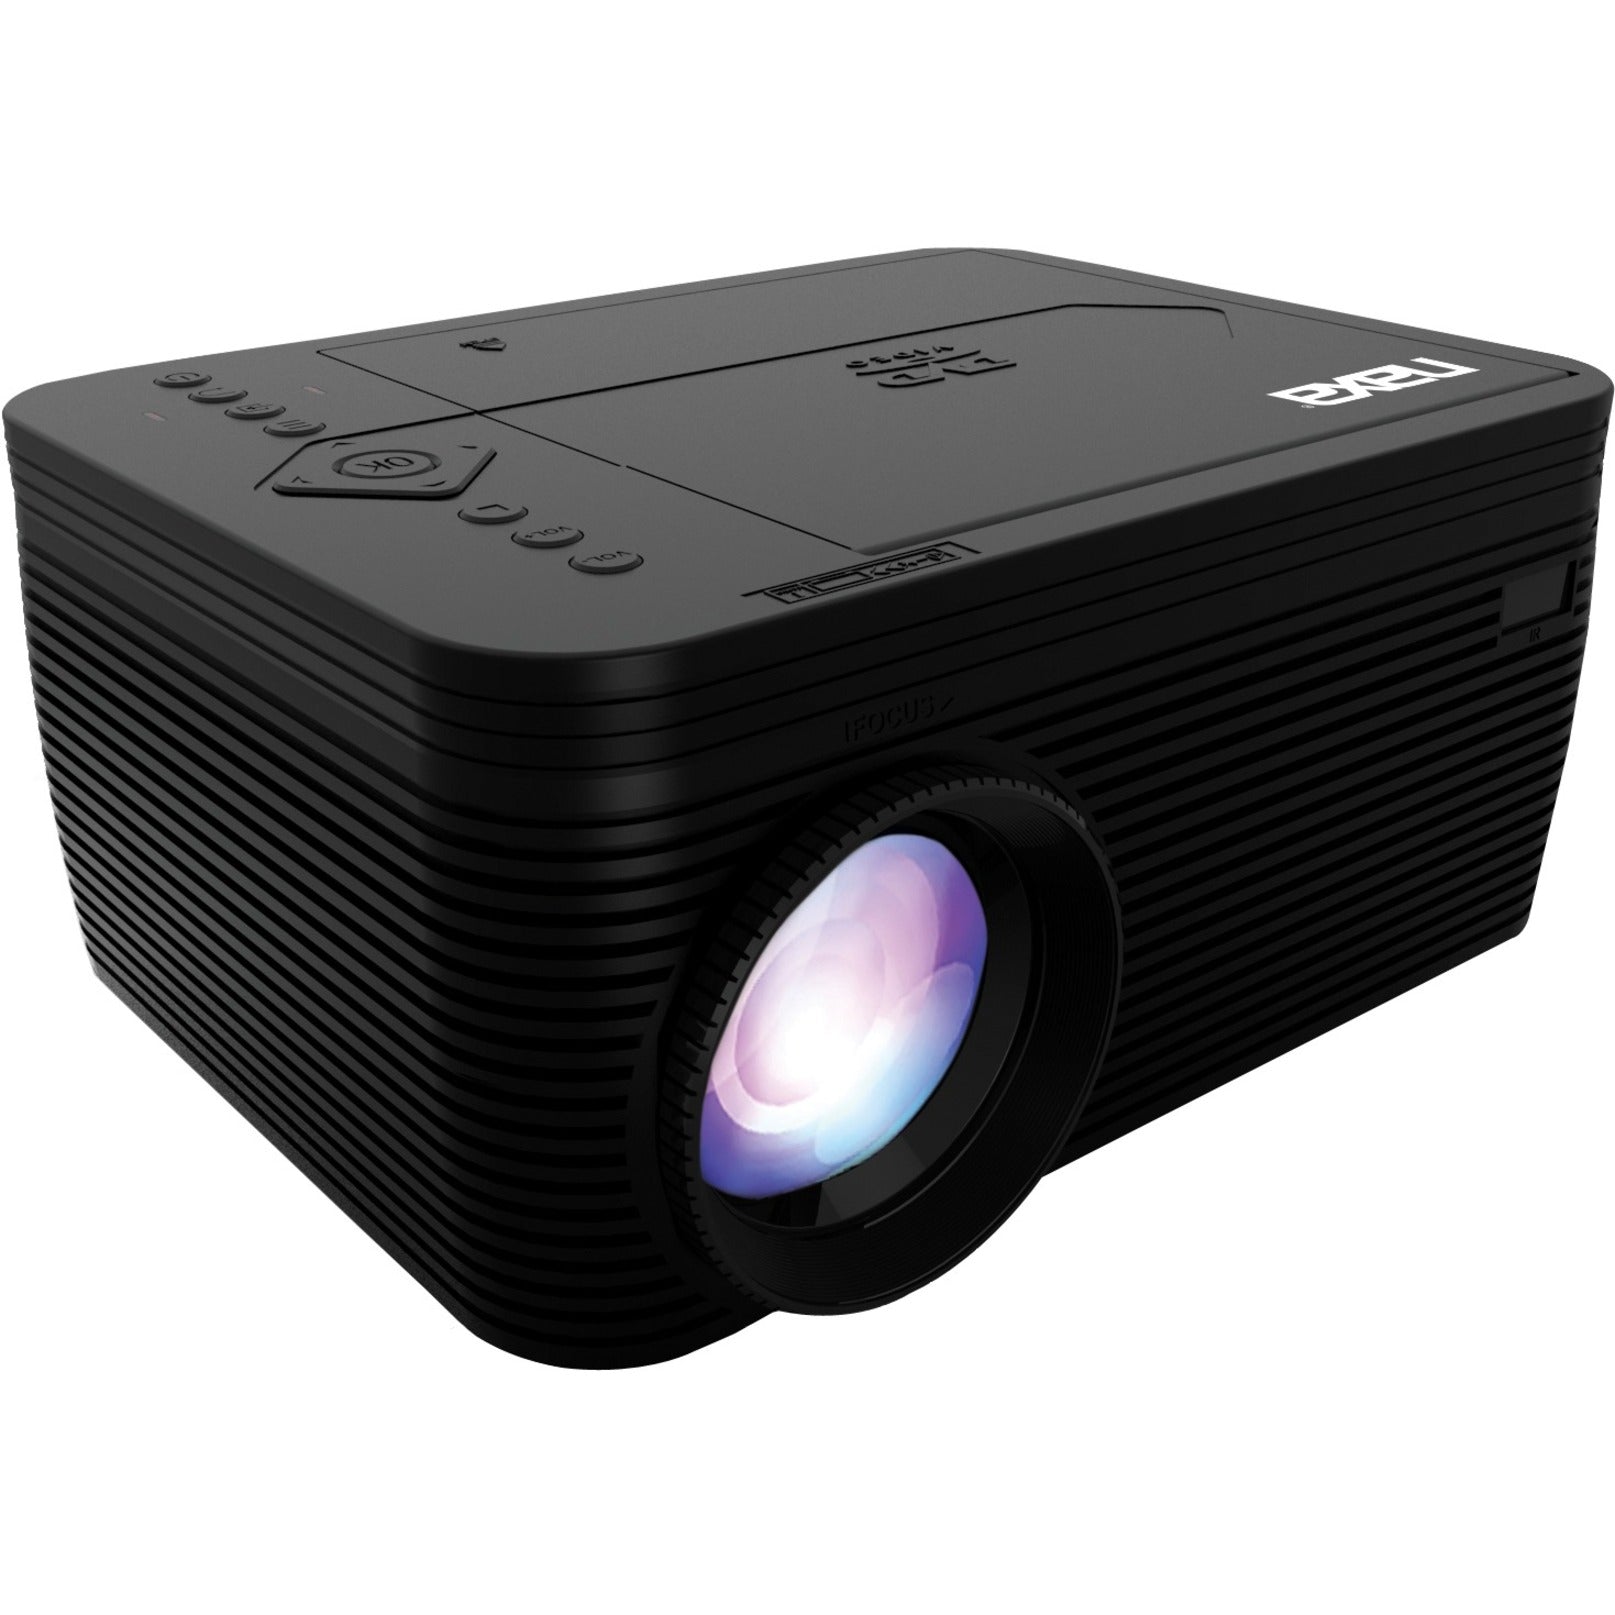 Naxa NVP-2500 150" Home Theater 720P LCD Projector with Built-In DVD Player, LED Lamp, 3600 lm, HDMI, USB